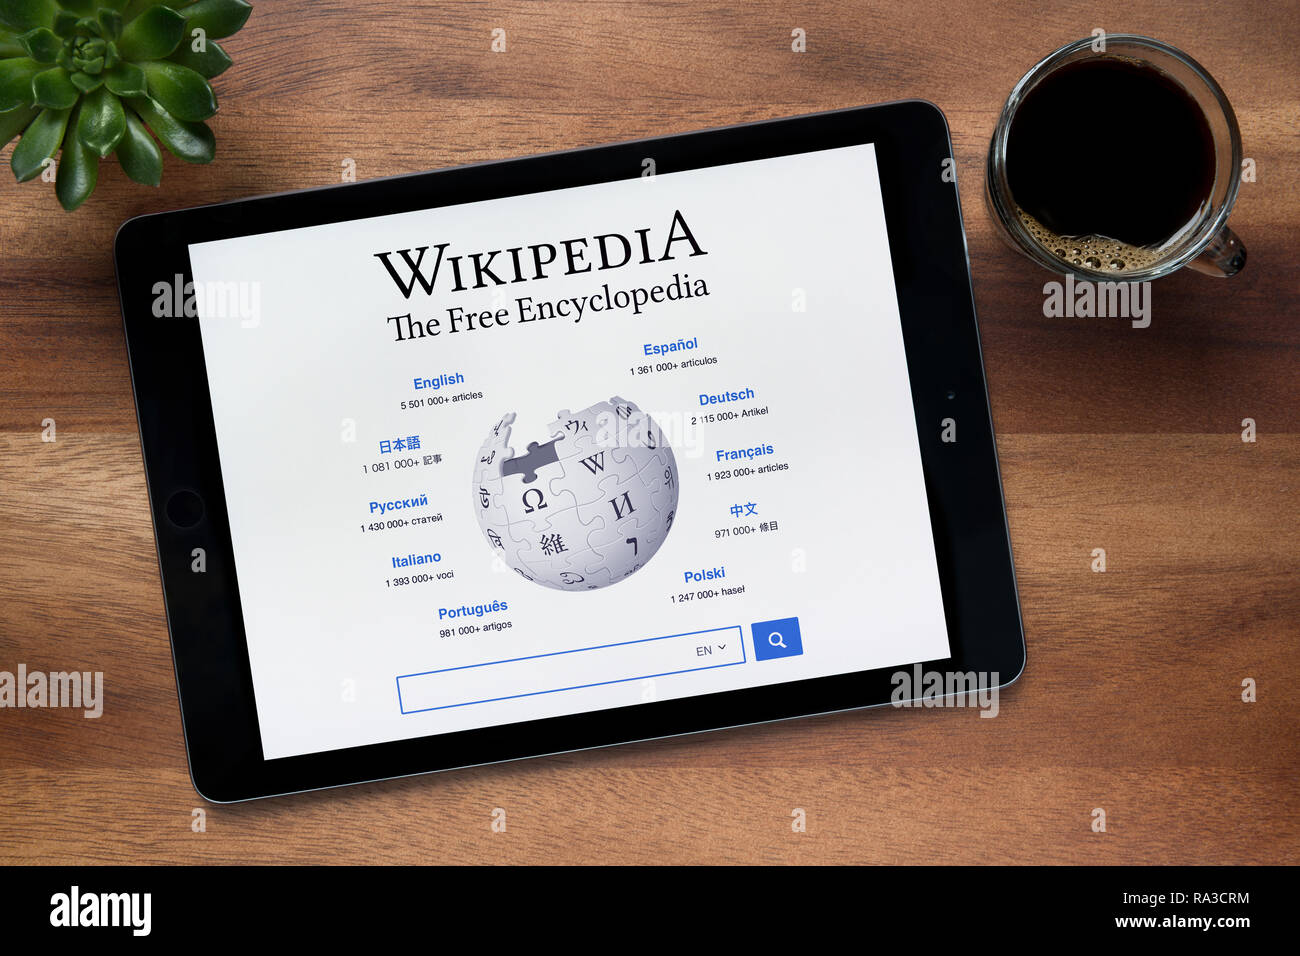 The website of Wikipedia is seen on an iPad tablet, on a wooden table along with an espresso coffee and a house plant (Editorial use only). Stock Photo